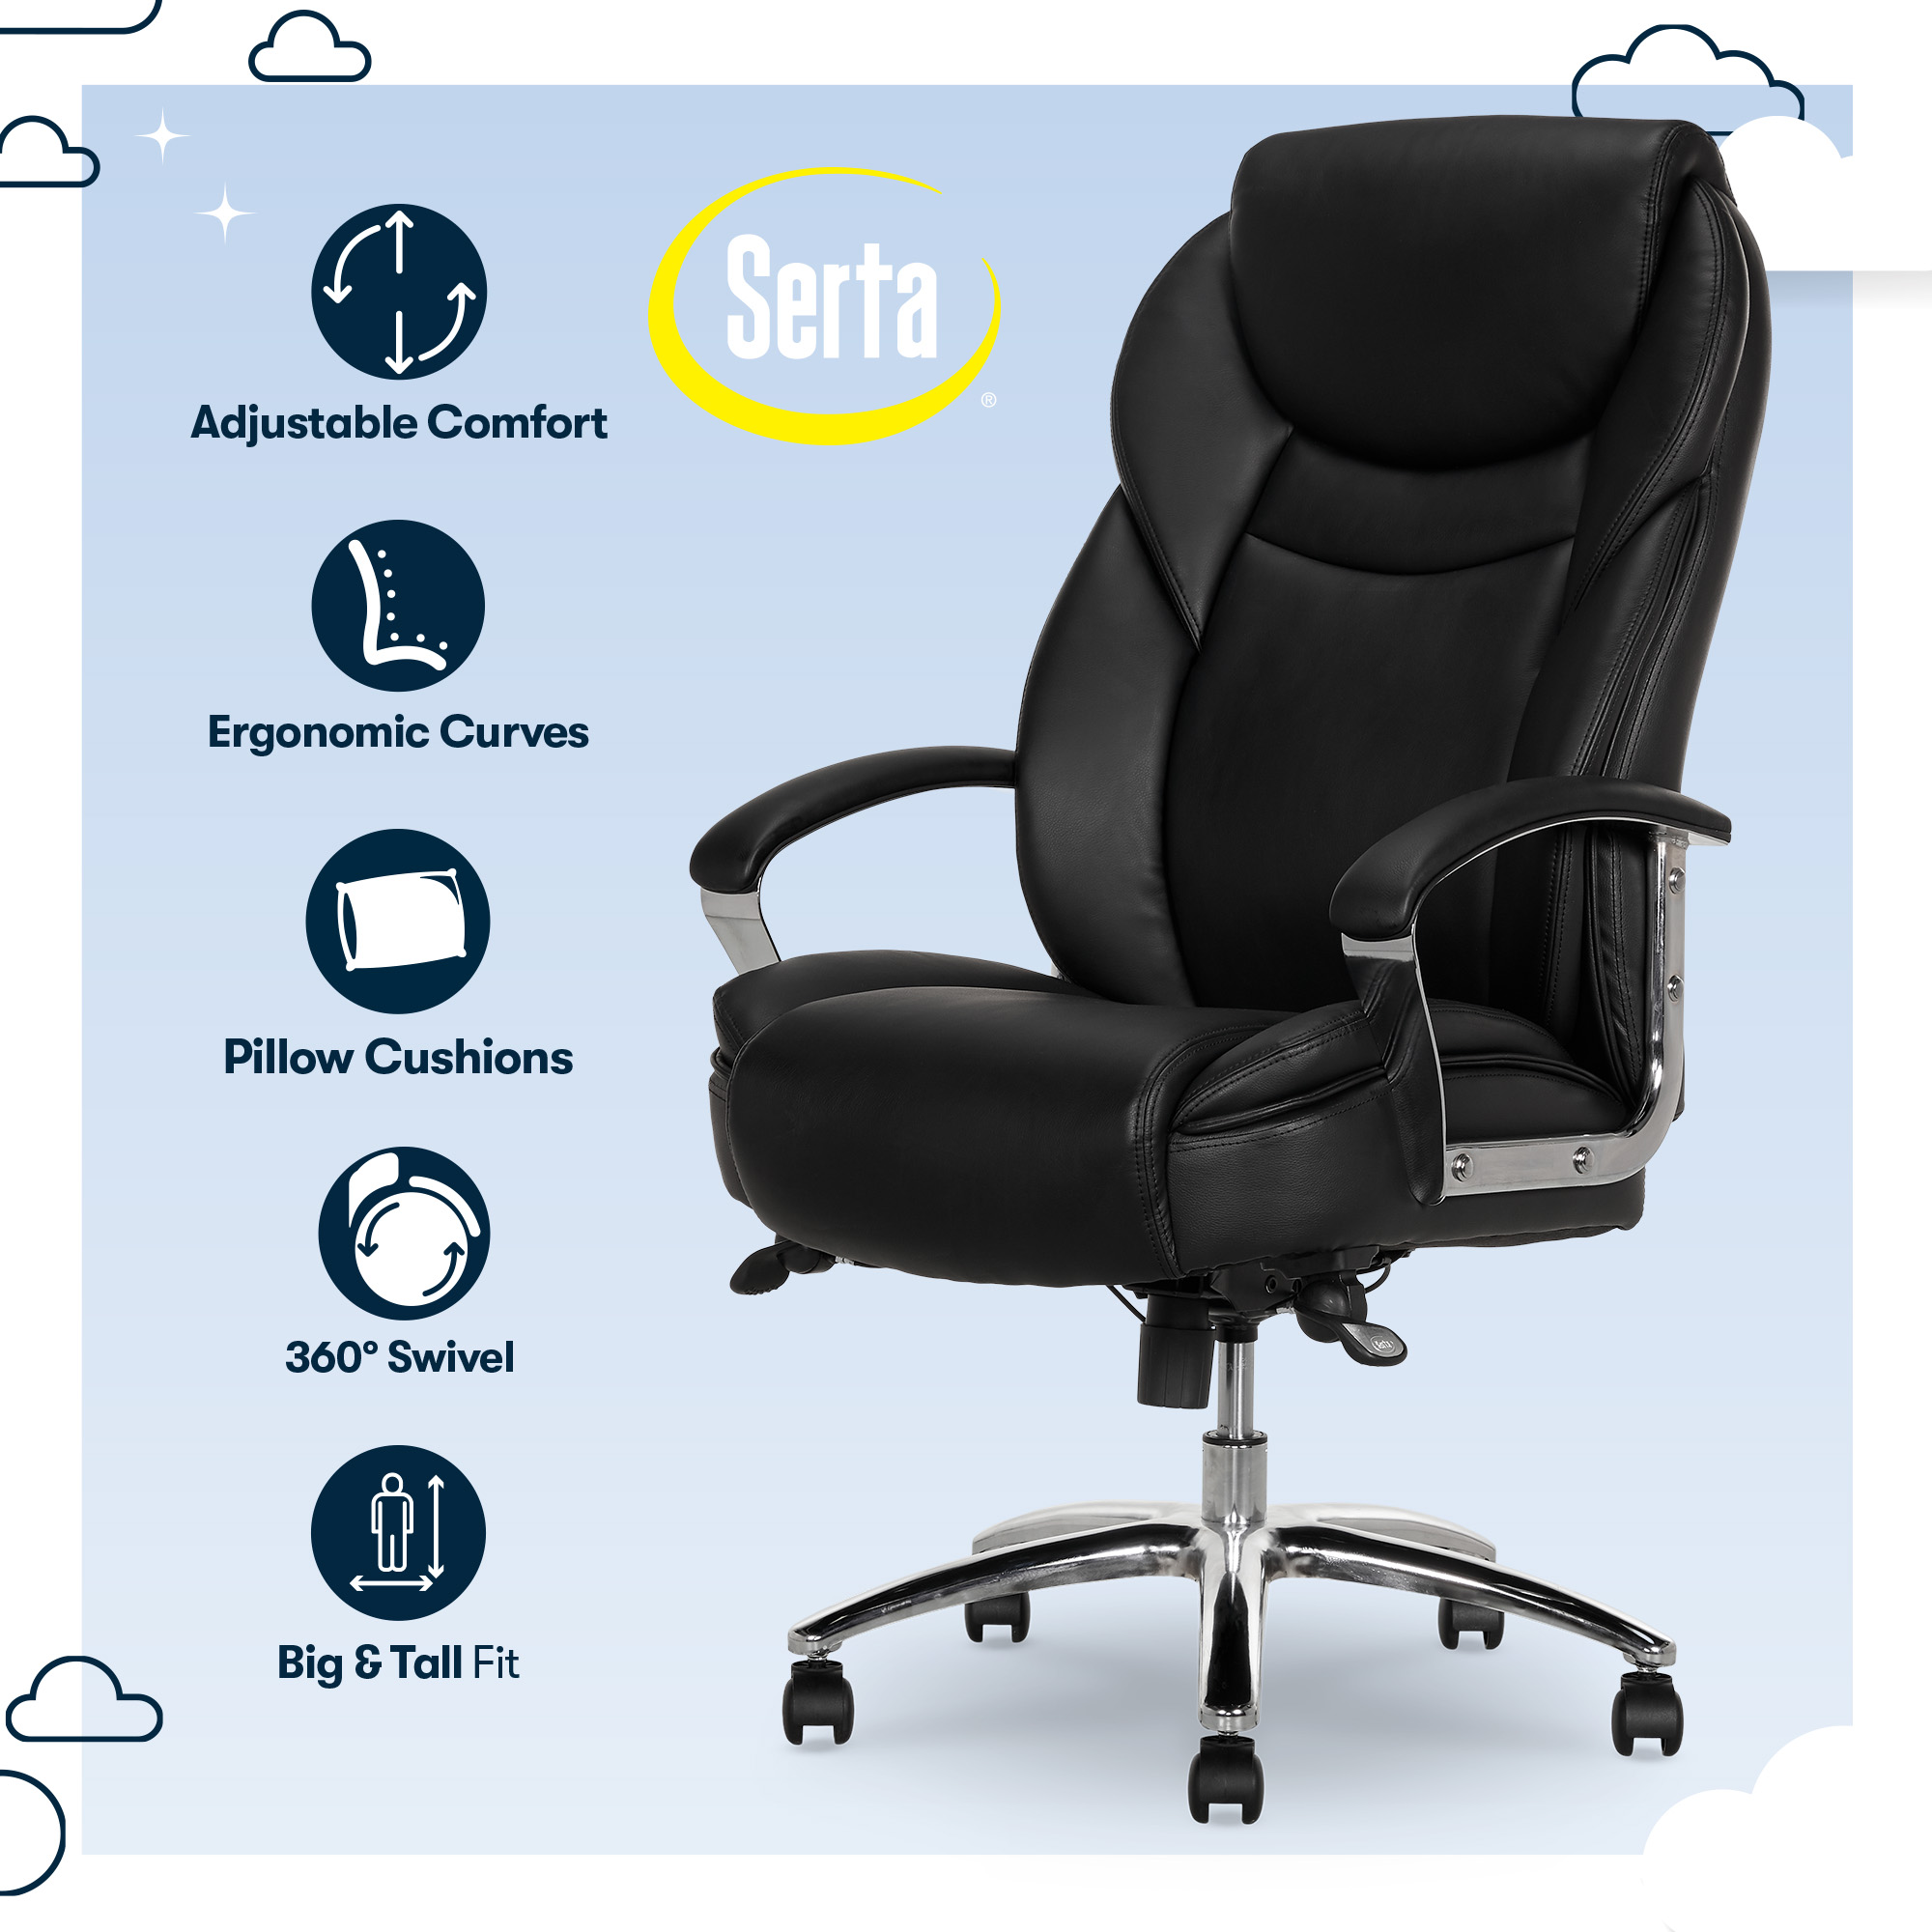 Serta Big & Tall High Back Office Chair, Heavy Duty Weight Rating, Black Bonded Leather Upholstery - image 2 of 12